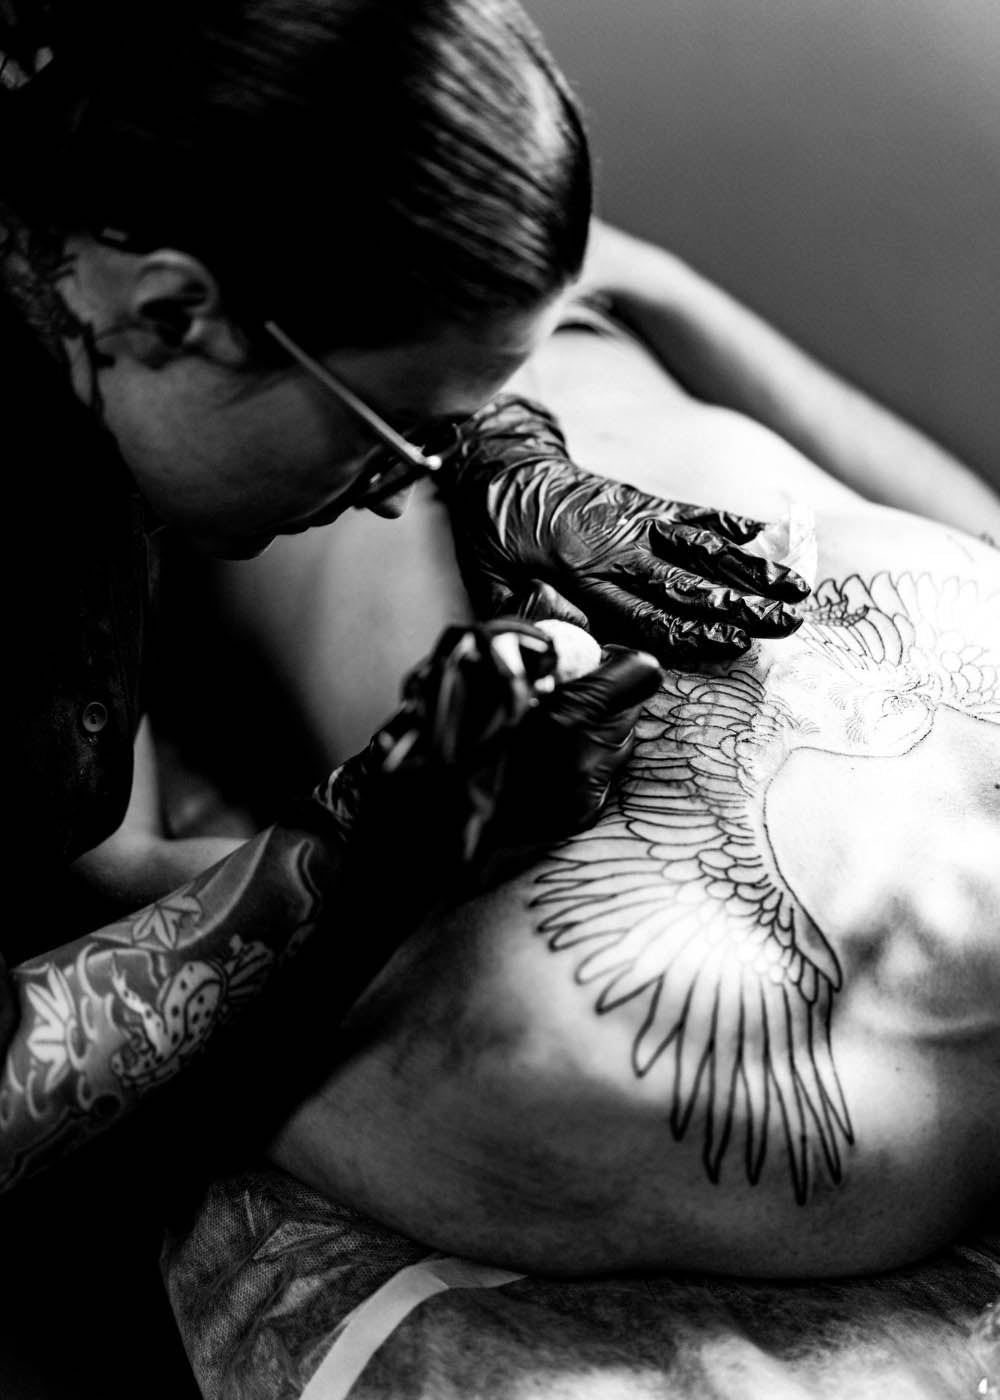 Tattooist tattooing a man's chest with a birds wing design